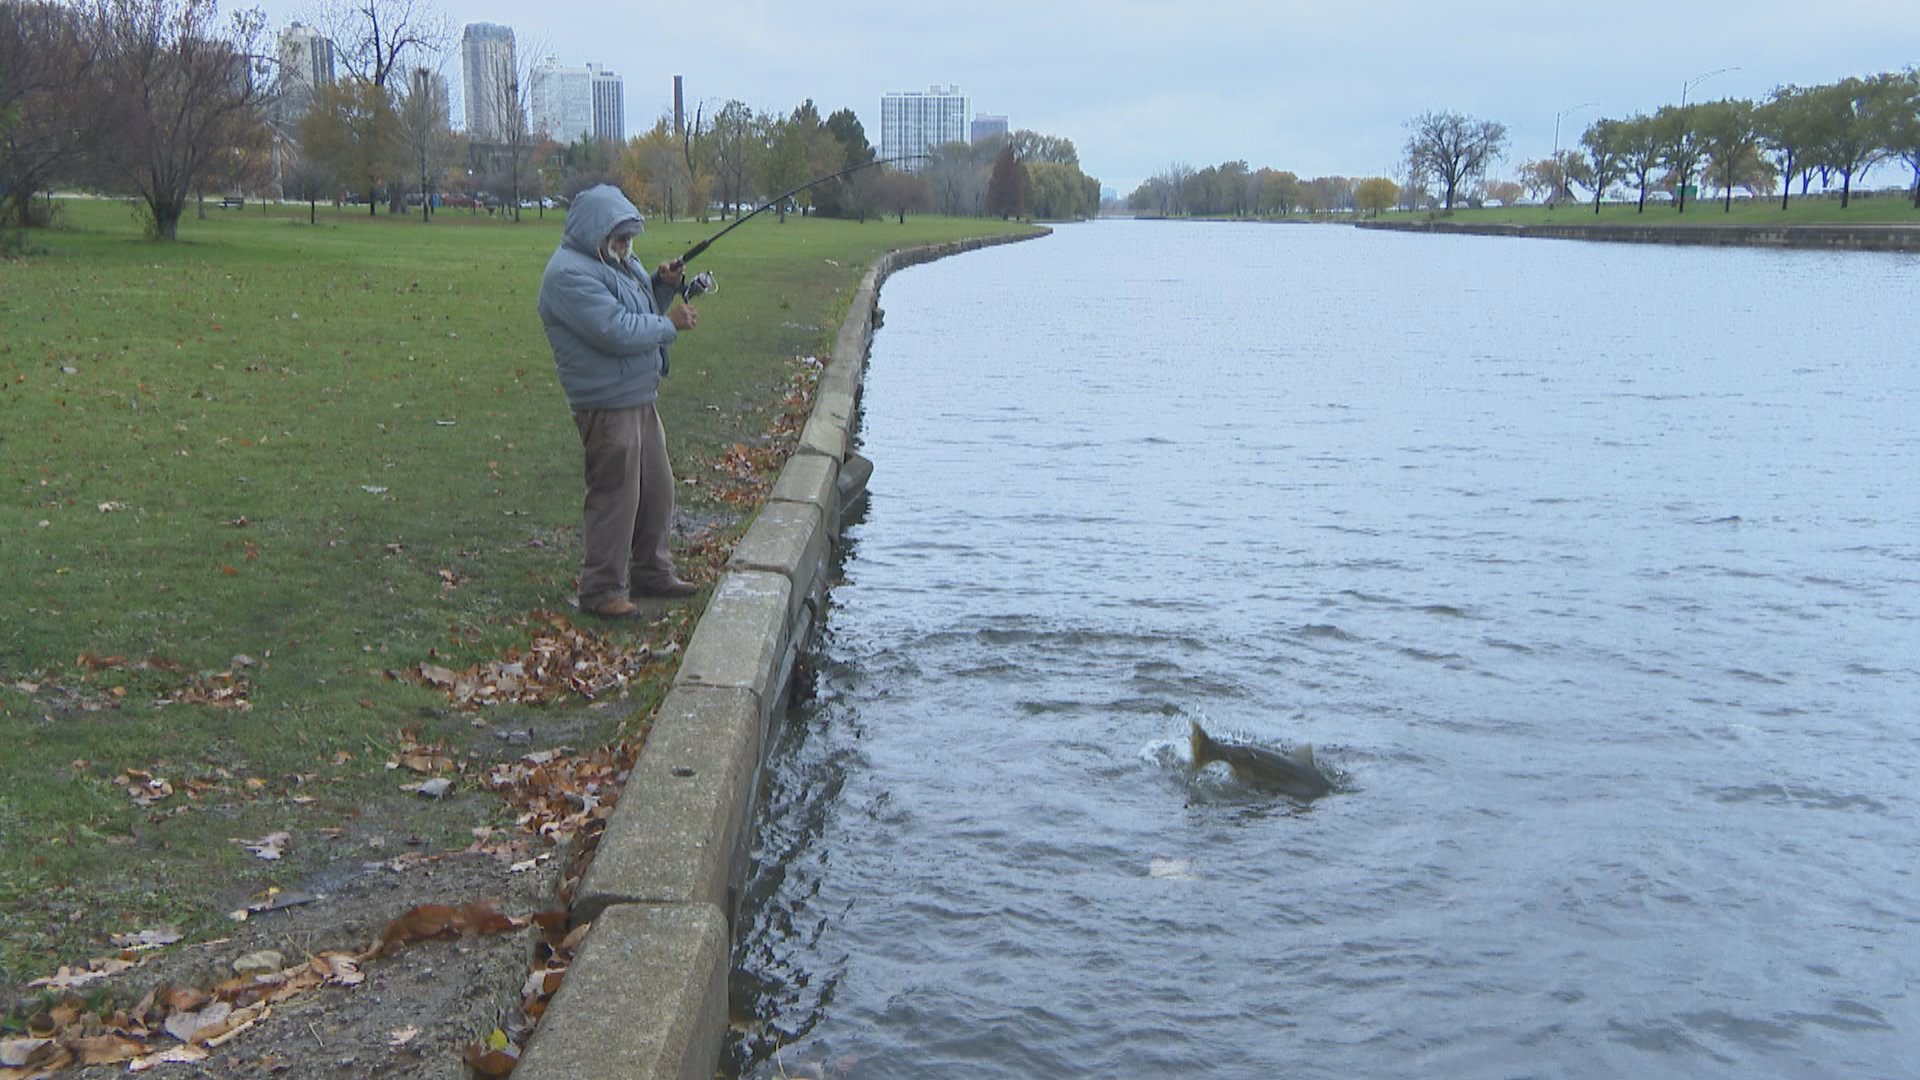 A Controversial Fishing Style: Snagging for Salmon in Chicago